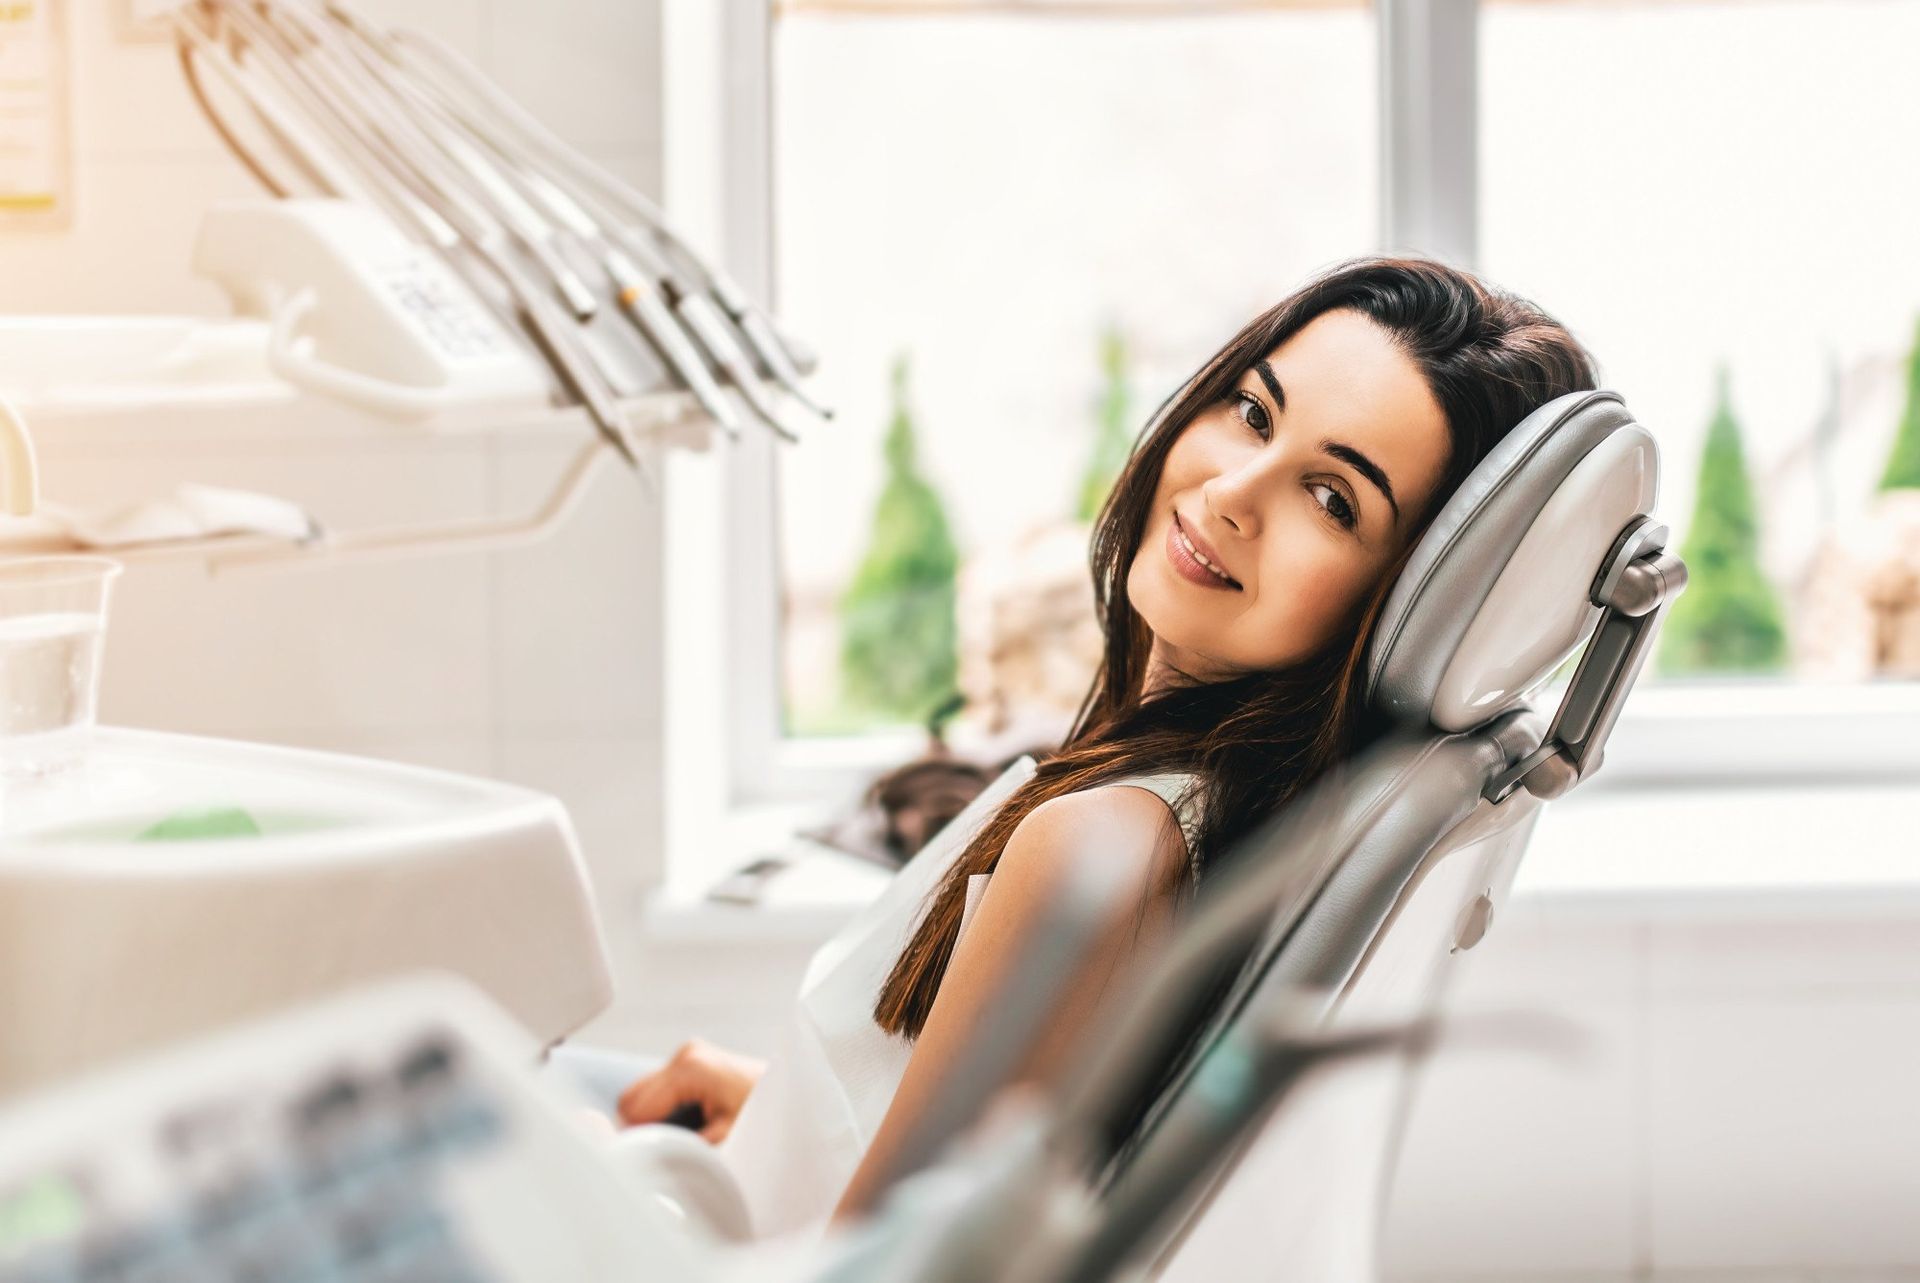 a woman is sitting in a dental chair and smiling